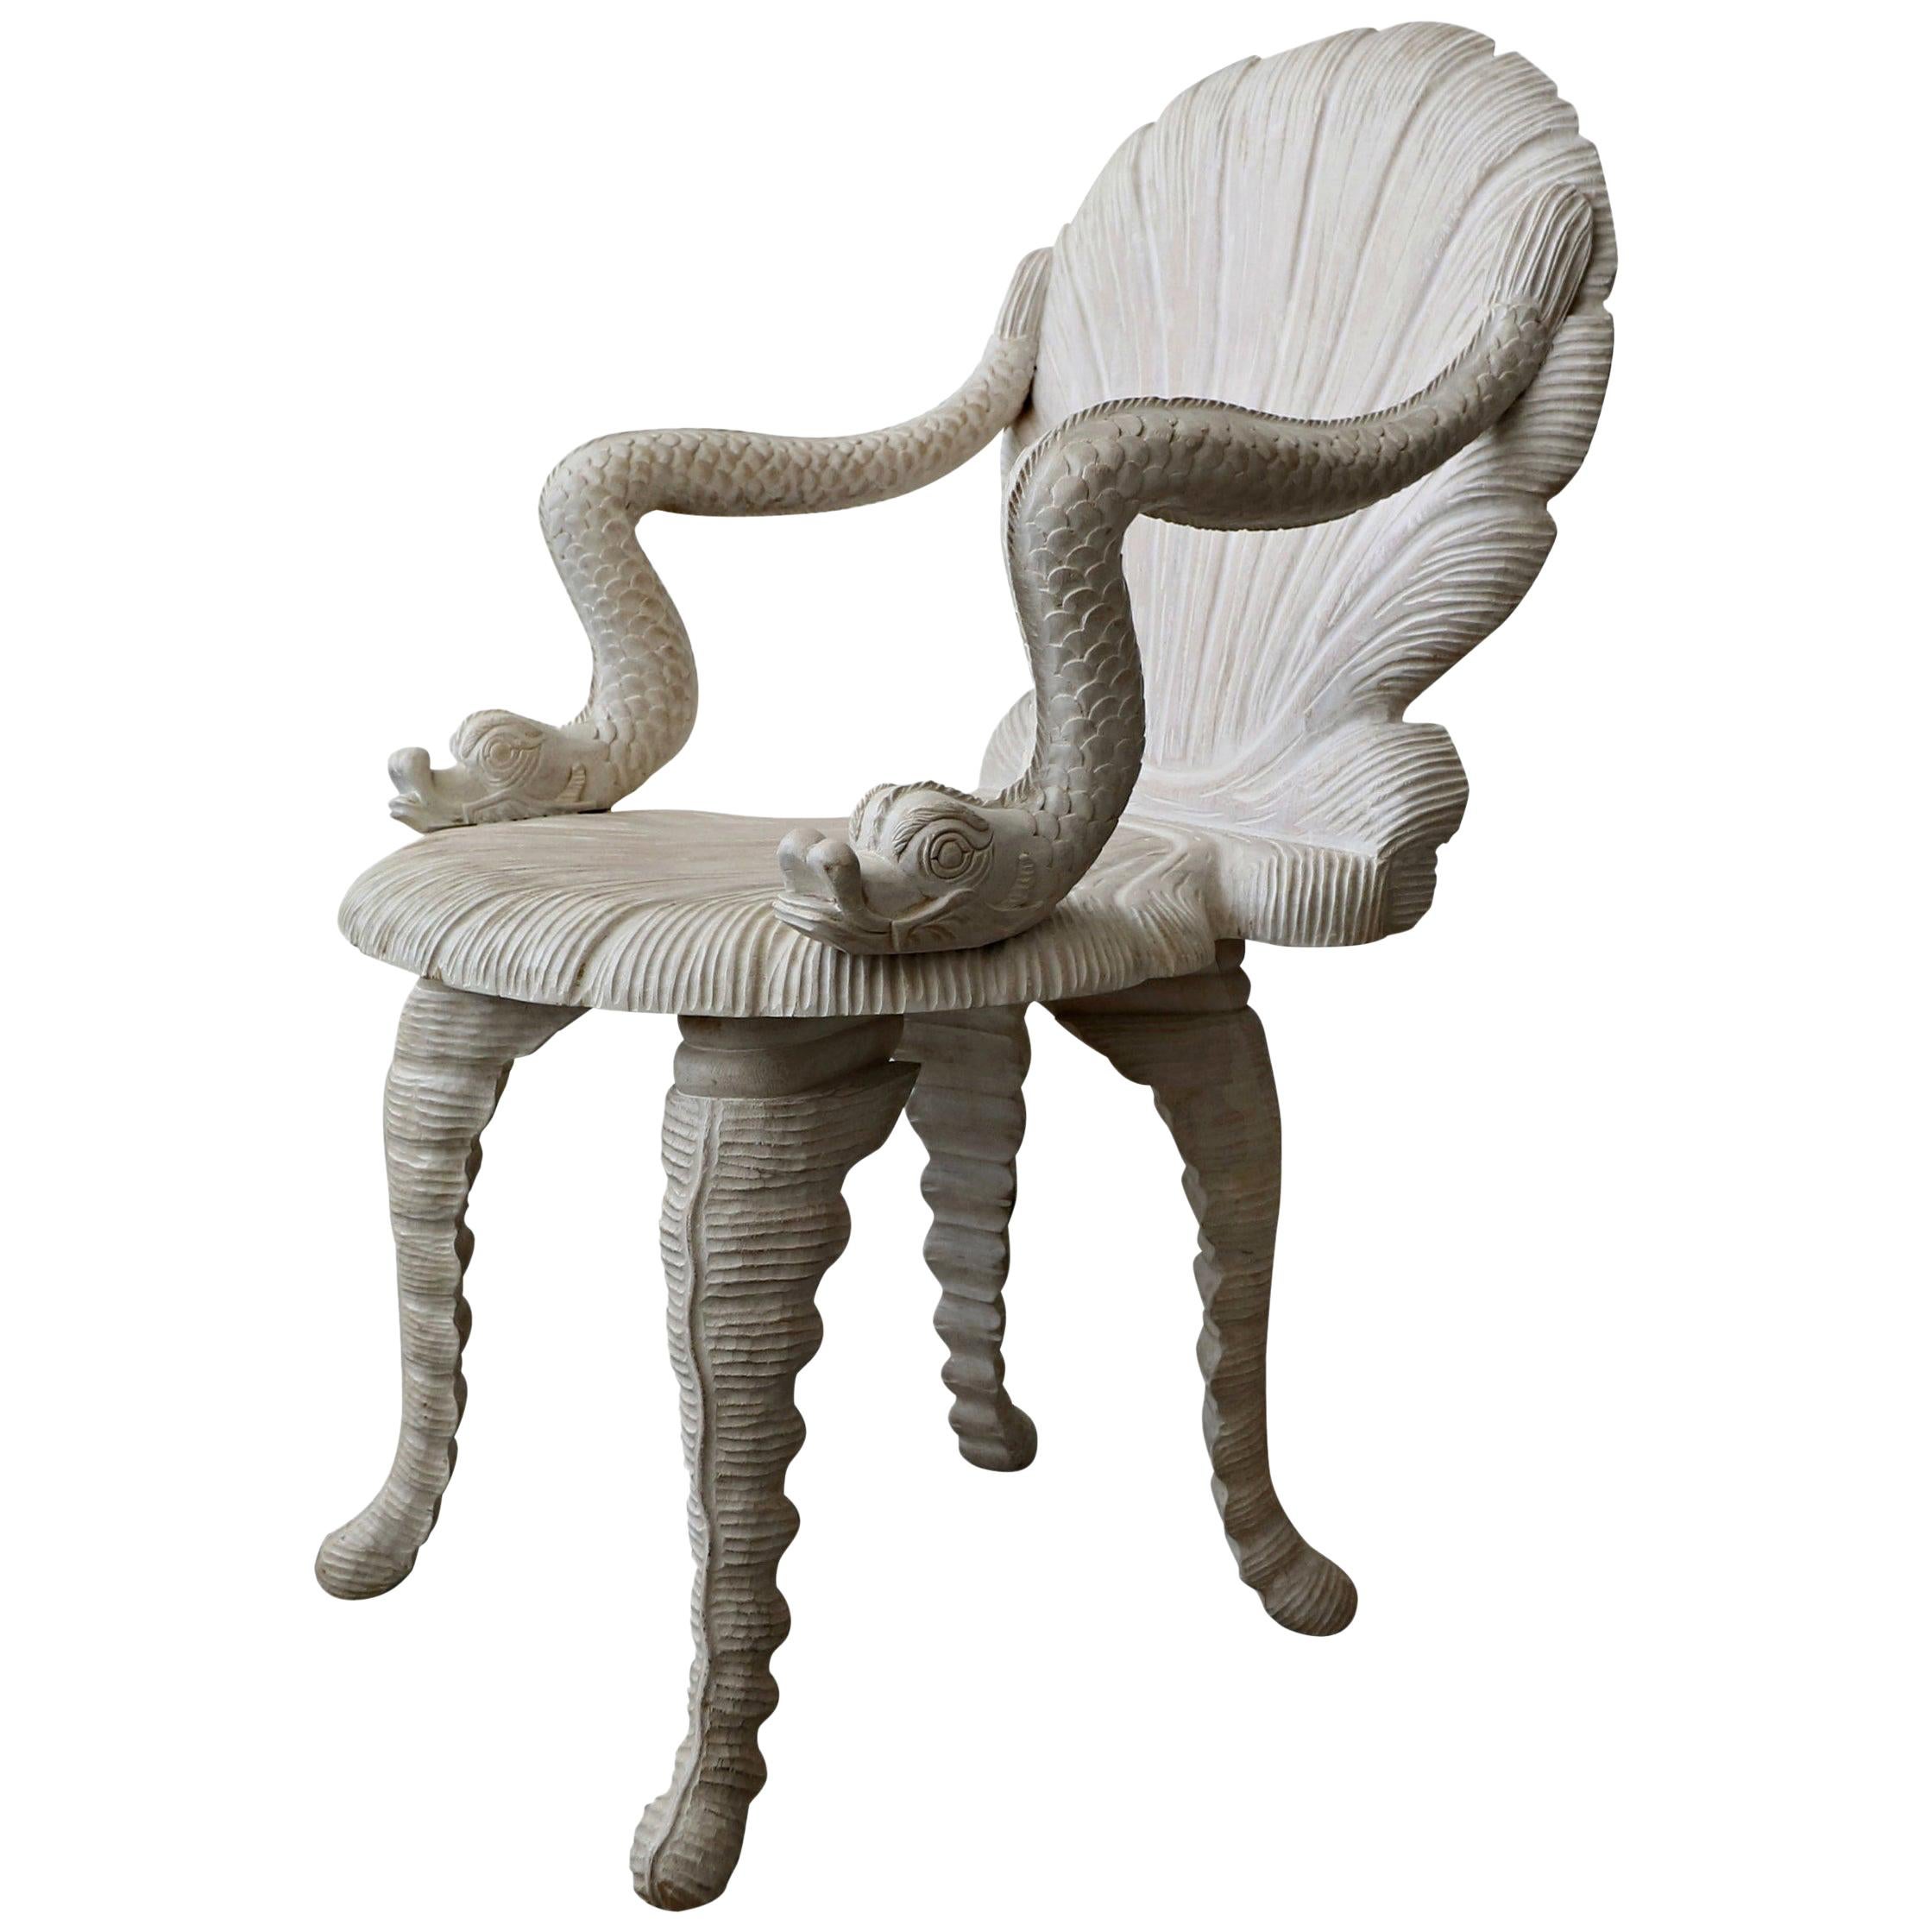 Hand Carved Venetian Grotto Style Chair